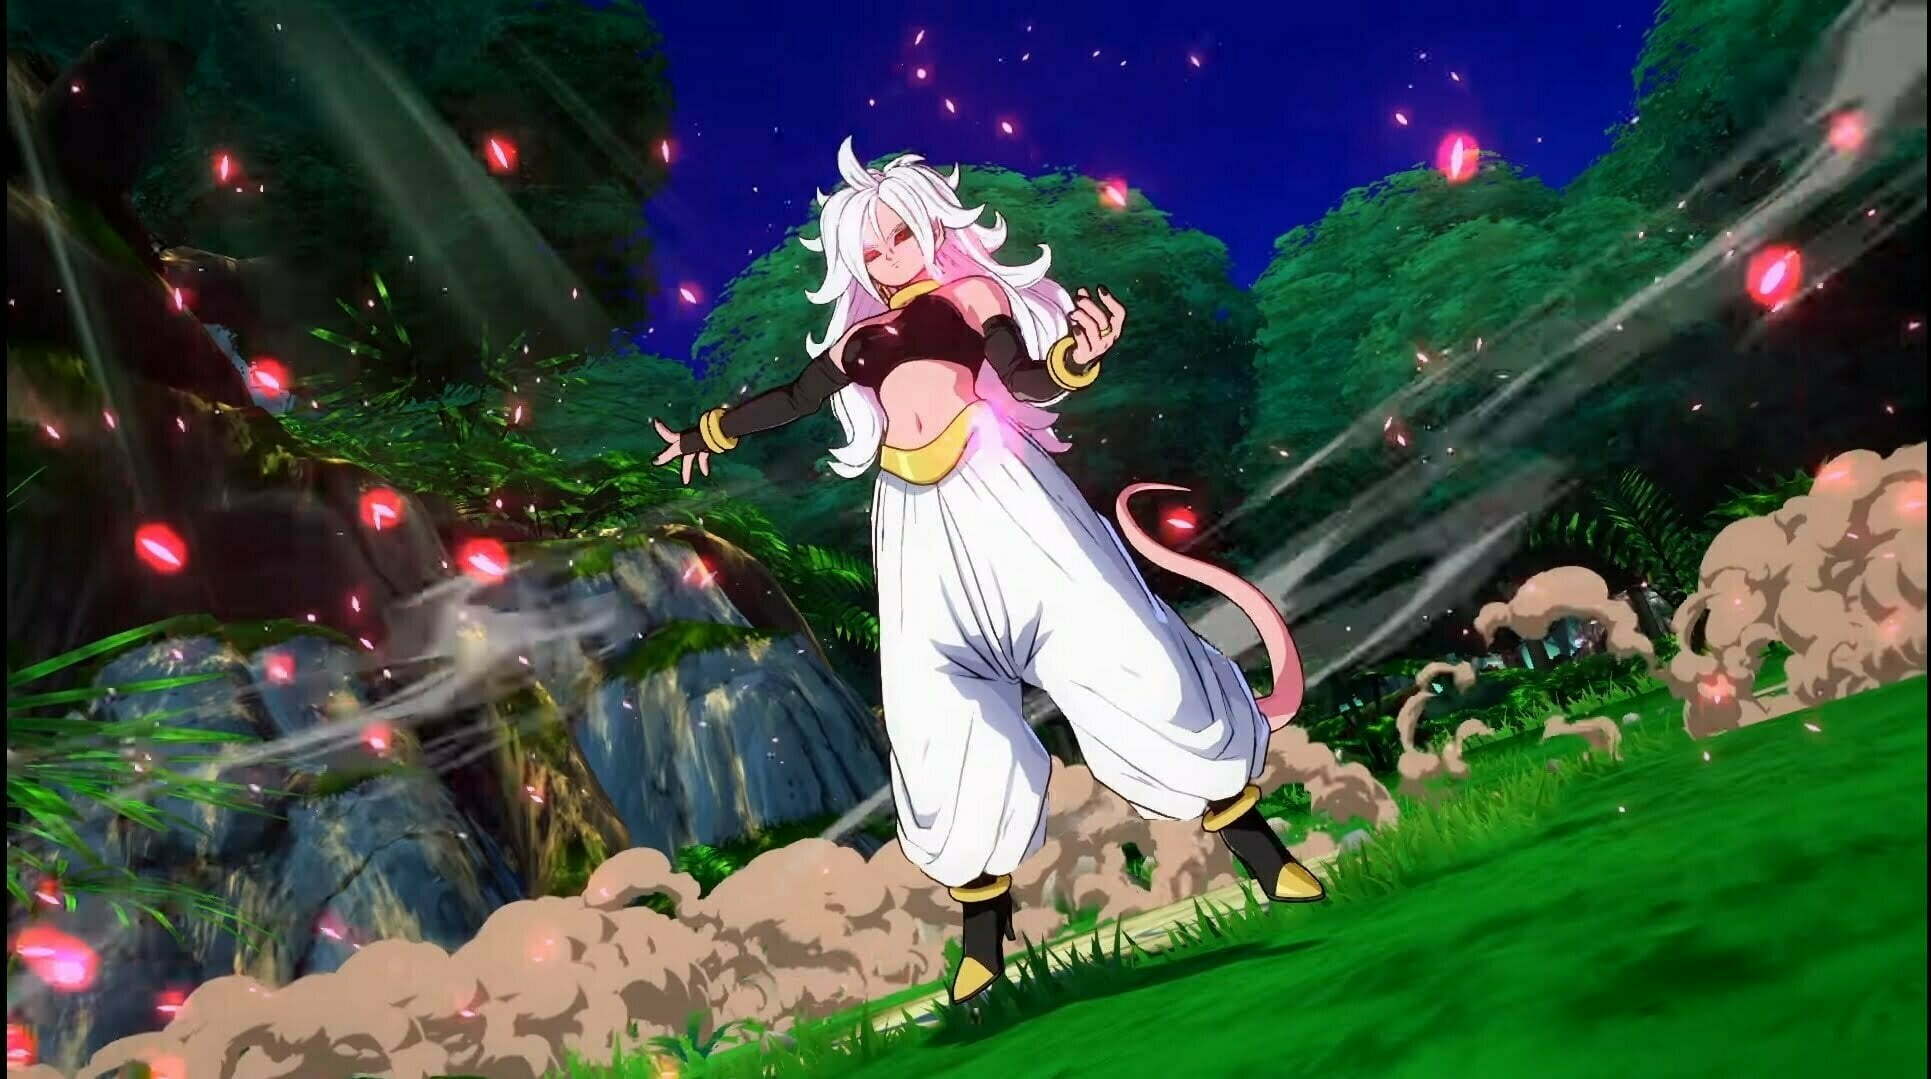 Android 21 in Dragon ball fighterz tier list A Tier